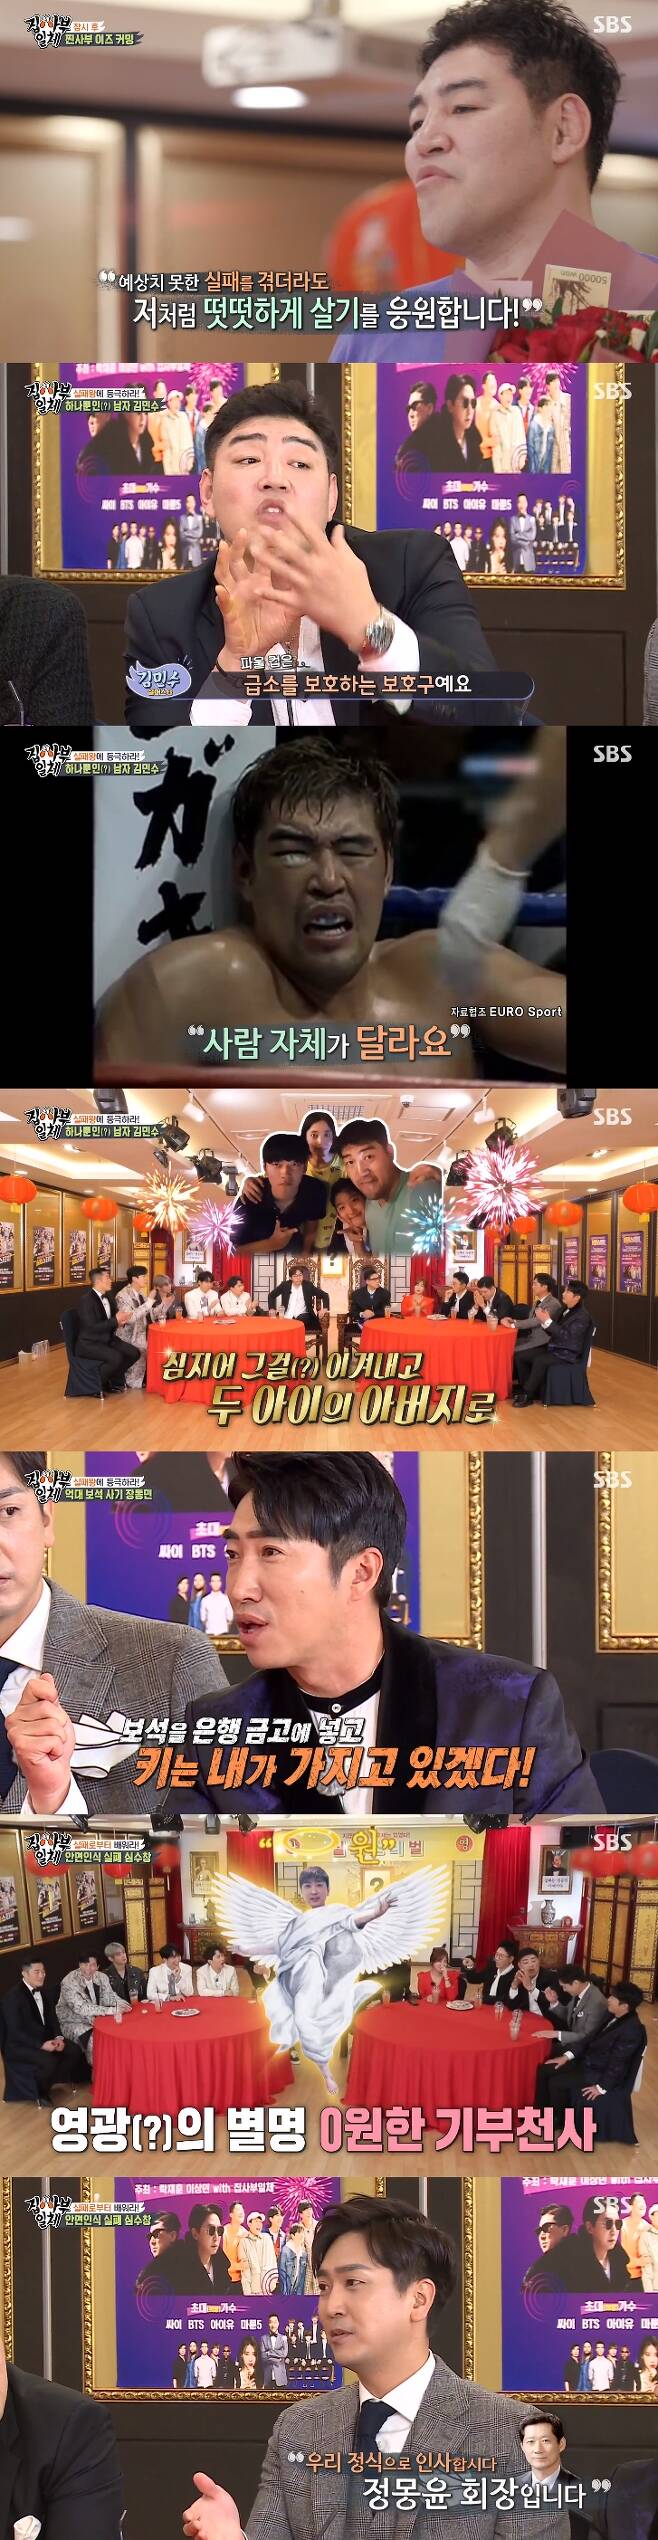 All The Butlers cheered viewers through Failure Stival.SBS entertainment program All The Butlers broadcasted on the 28th was decorated with Failure Stival and Ji Suk-jin, Lee Sang-min, Shim Soo-chang, Kim Min-soo, Jang Dong-min and Solbi were together.Ji Suk-jin laughed at the invitation to this part, saying, I do not have a problem living, but why do you do it?I think I have contacted you because of the contents of the failure stories in the past talk shows, he said. After the failure image, I was lonely that the acquaintances approached Ji Suk-jin to deceive him.The failed anecdote was first revealed by mixed martial arts player Kim Min-soo.I do not have one side, he said, shocked by a Kyonggi, and surprised everyone by revealing that one testicle ruptured.I was hit very strongly in the fourth round, he explained, explaining that the plastic foul cup (protector) among Murad Bowjidi and Kyonggi was so priced that it was broken.The data screen revealed Kim Min-soos situation at the time. His face was swollen and painful.I was so sick, but I was feverish. The doctor checked and decided that it was okay, so I resumed Kyonggi three minutes later. I did not even know it was sick.Kim Min-soo, who had persisted in Suffering, eventually won the round and won the round.Yang said, It is a sucking that I can not imagine, but it is great to play Kyonggi again.Ji Suk-jin laughed at the fact that Kim Min-soo had two children under such circumstances.Former baseball player Shim Soo-chang also mentioned the painful record of 18 consecutive losses as a pitcher, saying, When I passed 10 consecutive losses, I put down me.I said I would donate during the losing season, but it became a 0-member donation angel.Kim Min-soo, who was considered to be the king of failure at the end of the broadcast, said, I hope that those who have experienced similar things like me will live like me.Kim Min-soos failure story made a deeper impression with the process of being perceived from flashing to mental submerging.It was a difficult story to tell, but it was frankly brought out and touched more truthfully. Thanks to this, the four-week colon of the Failure Stival was also attracted to the beauty of the species.photoSBS broadcast screen